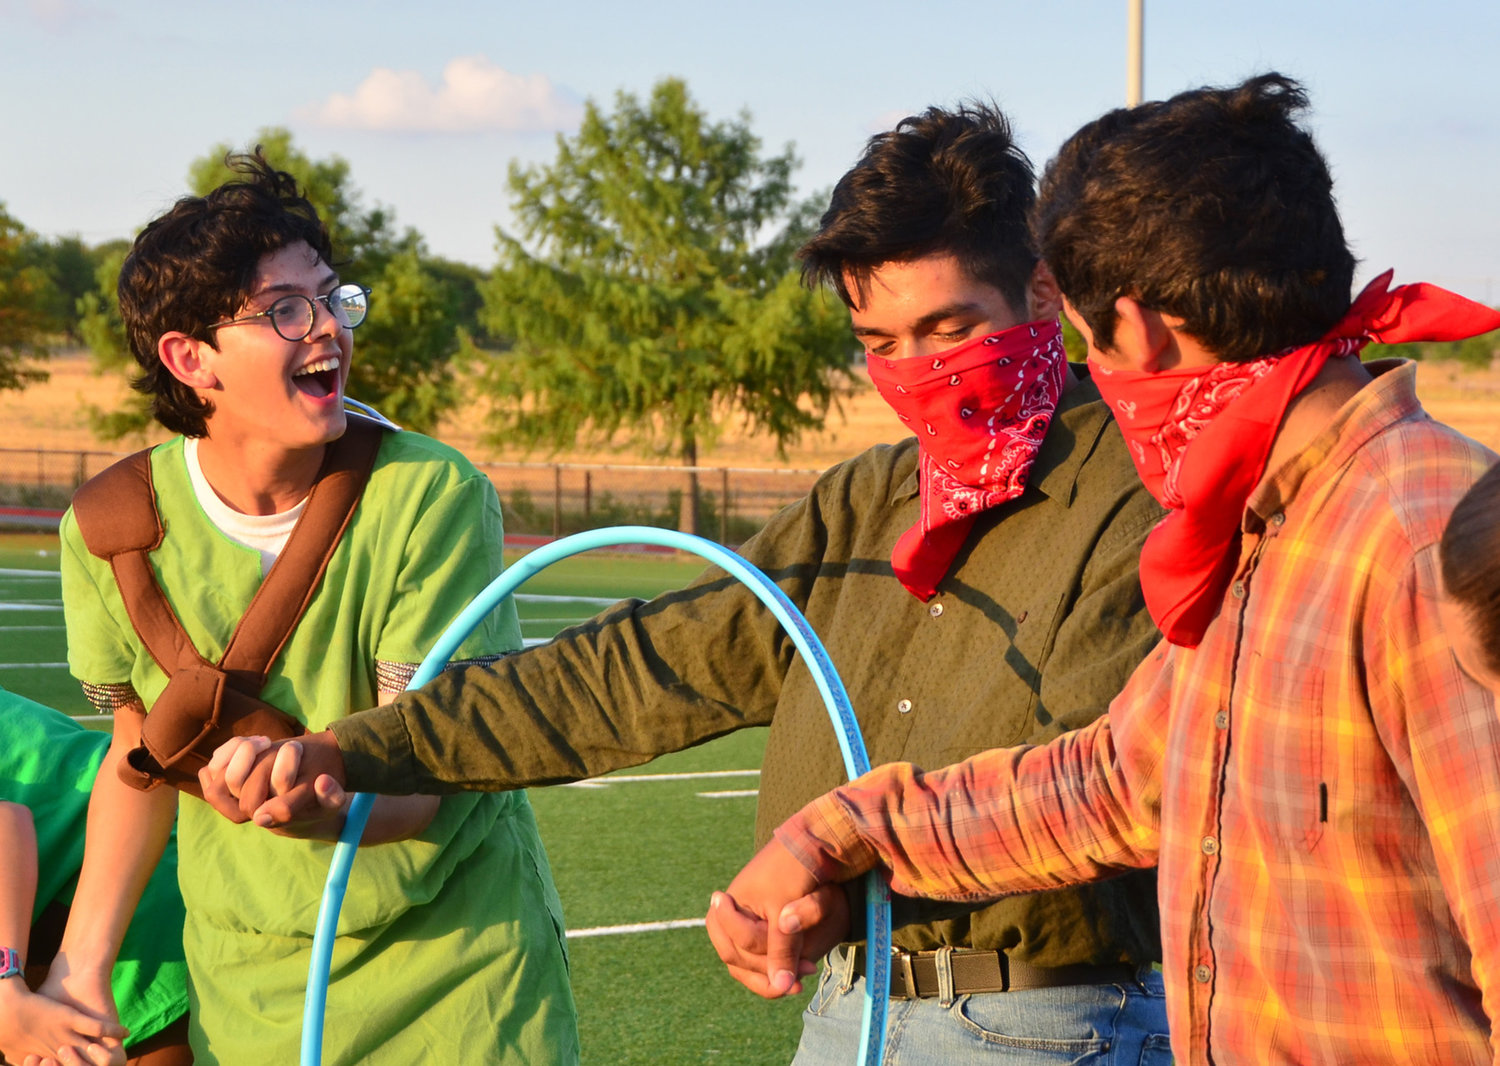 Garhett Daves, Marco Nava, and Jerry Olazaran get tangled up during the Aledo Band Olympics hoola-hoop relay. This is the 20th year for the zany team-building event.